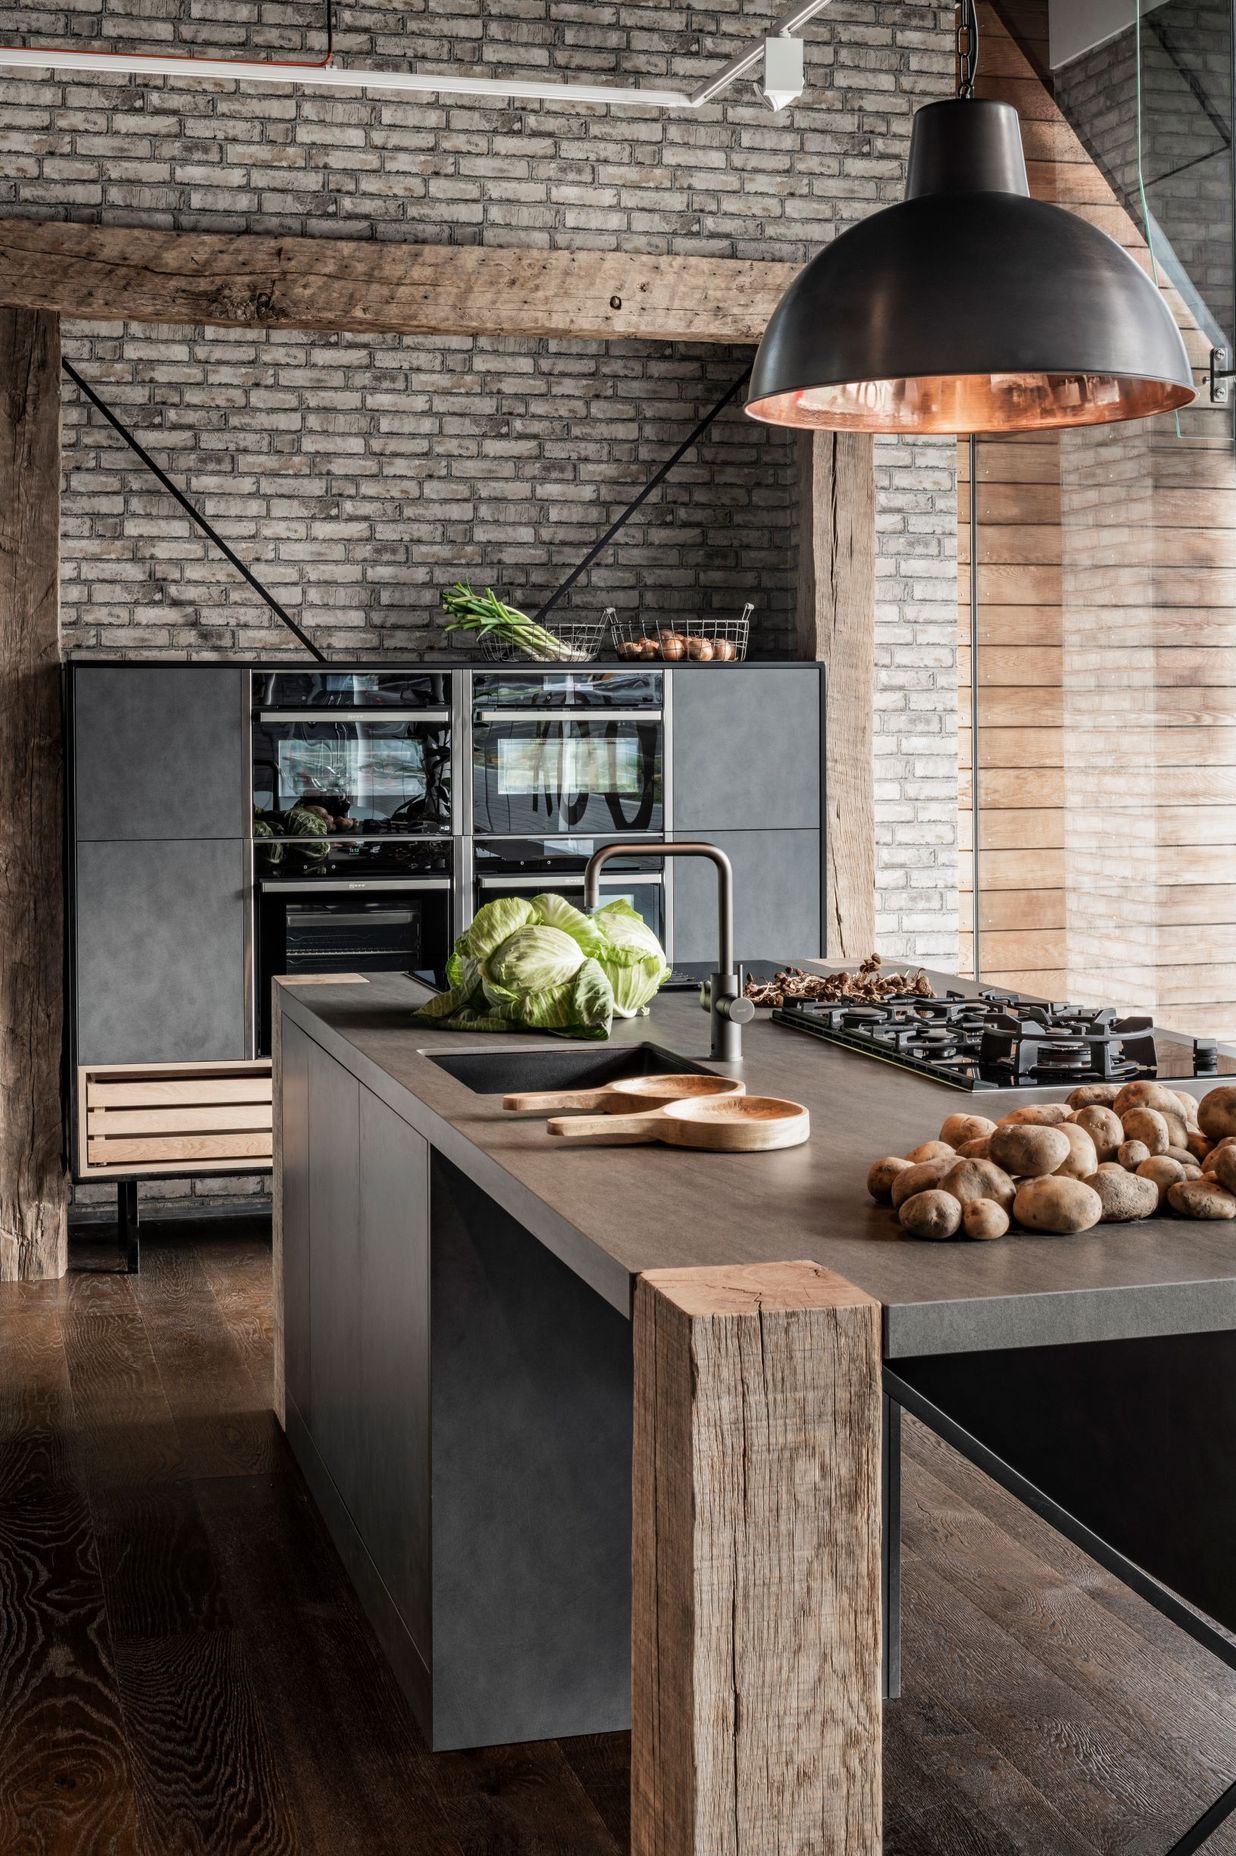 The 200 year old French oak beams are not the only impressive element of this kitchen display by Armstrong Interiors. Shown within this display are NEFF appliances and lighting by ECC